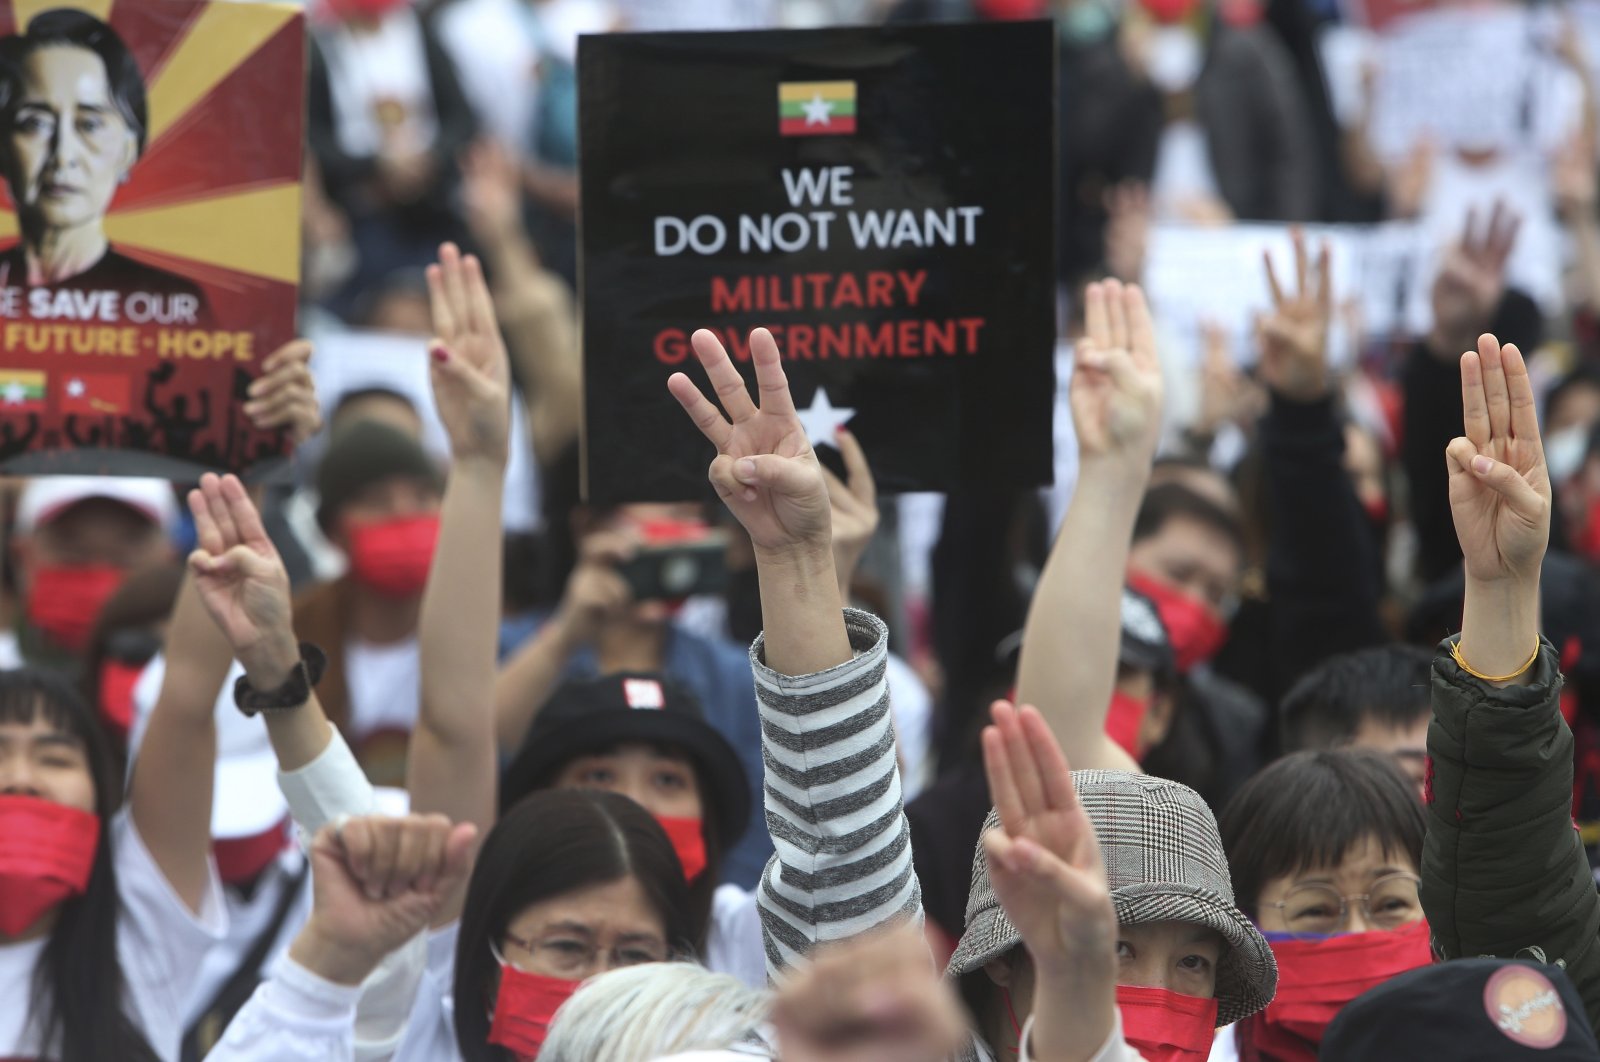 Myanmar nationals living in Taiwan make the three-finger salute of resistance as they attend a protest against the military regime in Myanmar at Liberty Square in Taipei, Taiwan, March 21, 2021. (AP Photo)